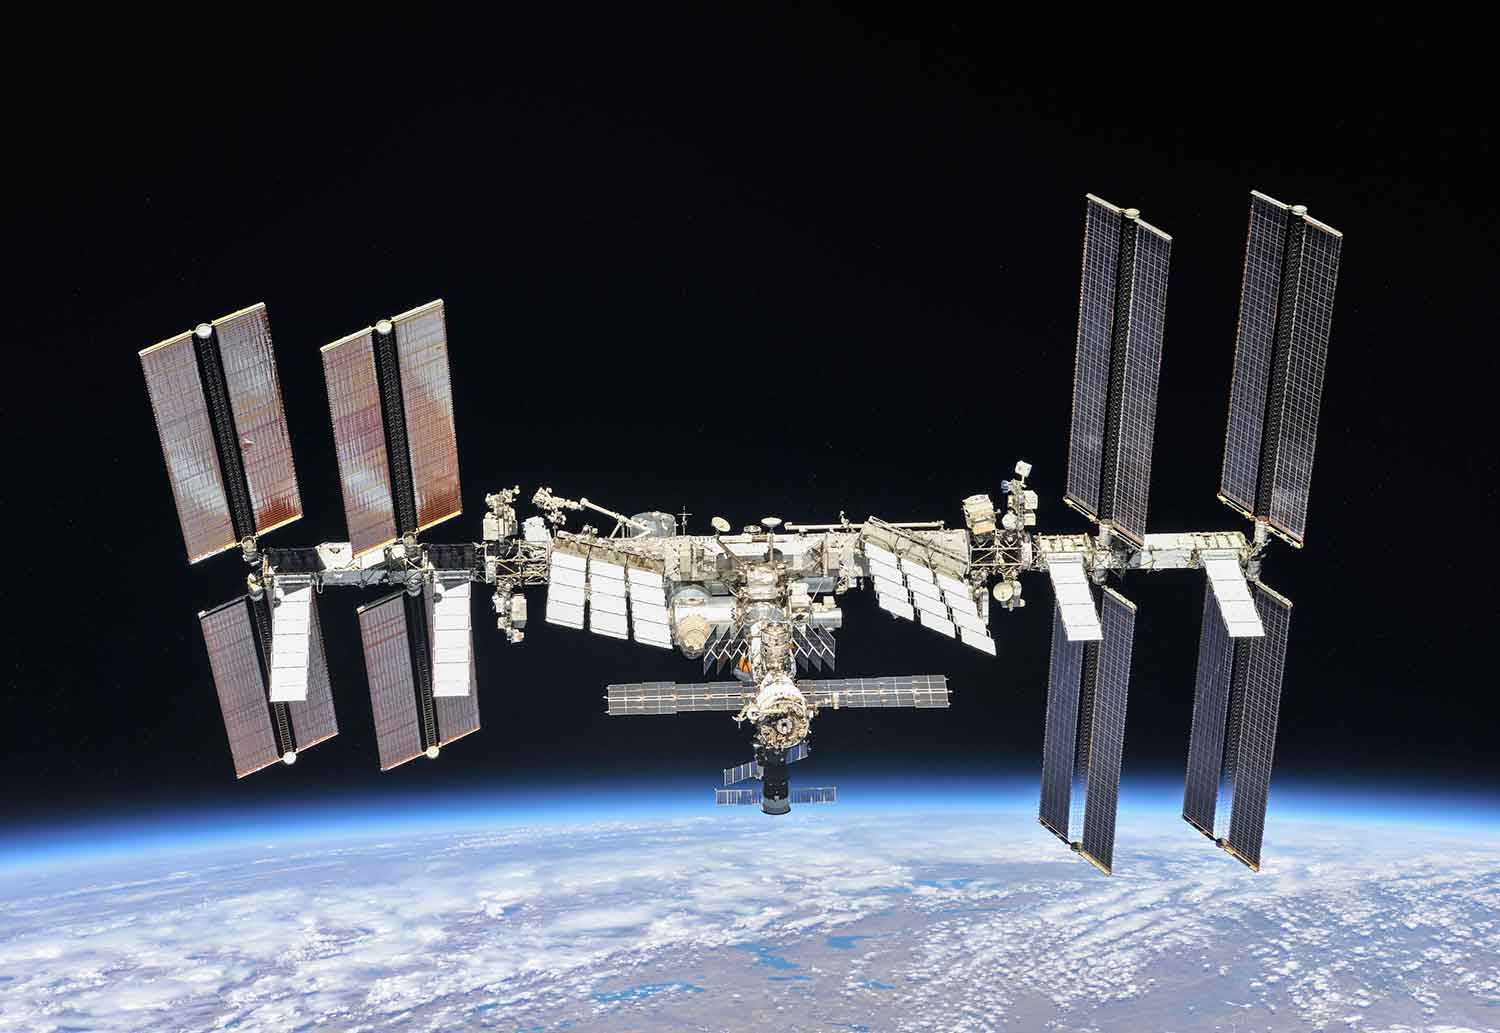 The International Space Station orbits Earth.